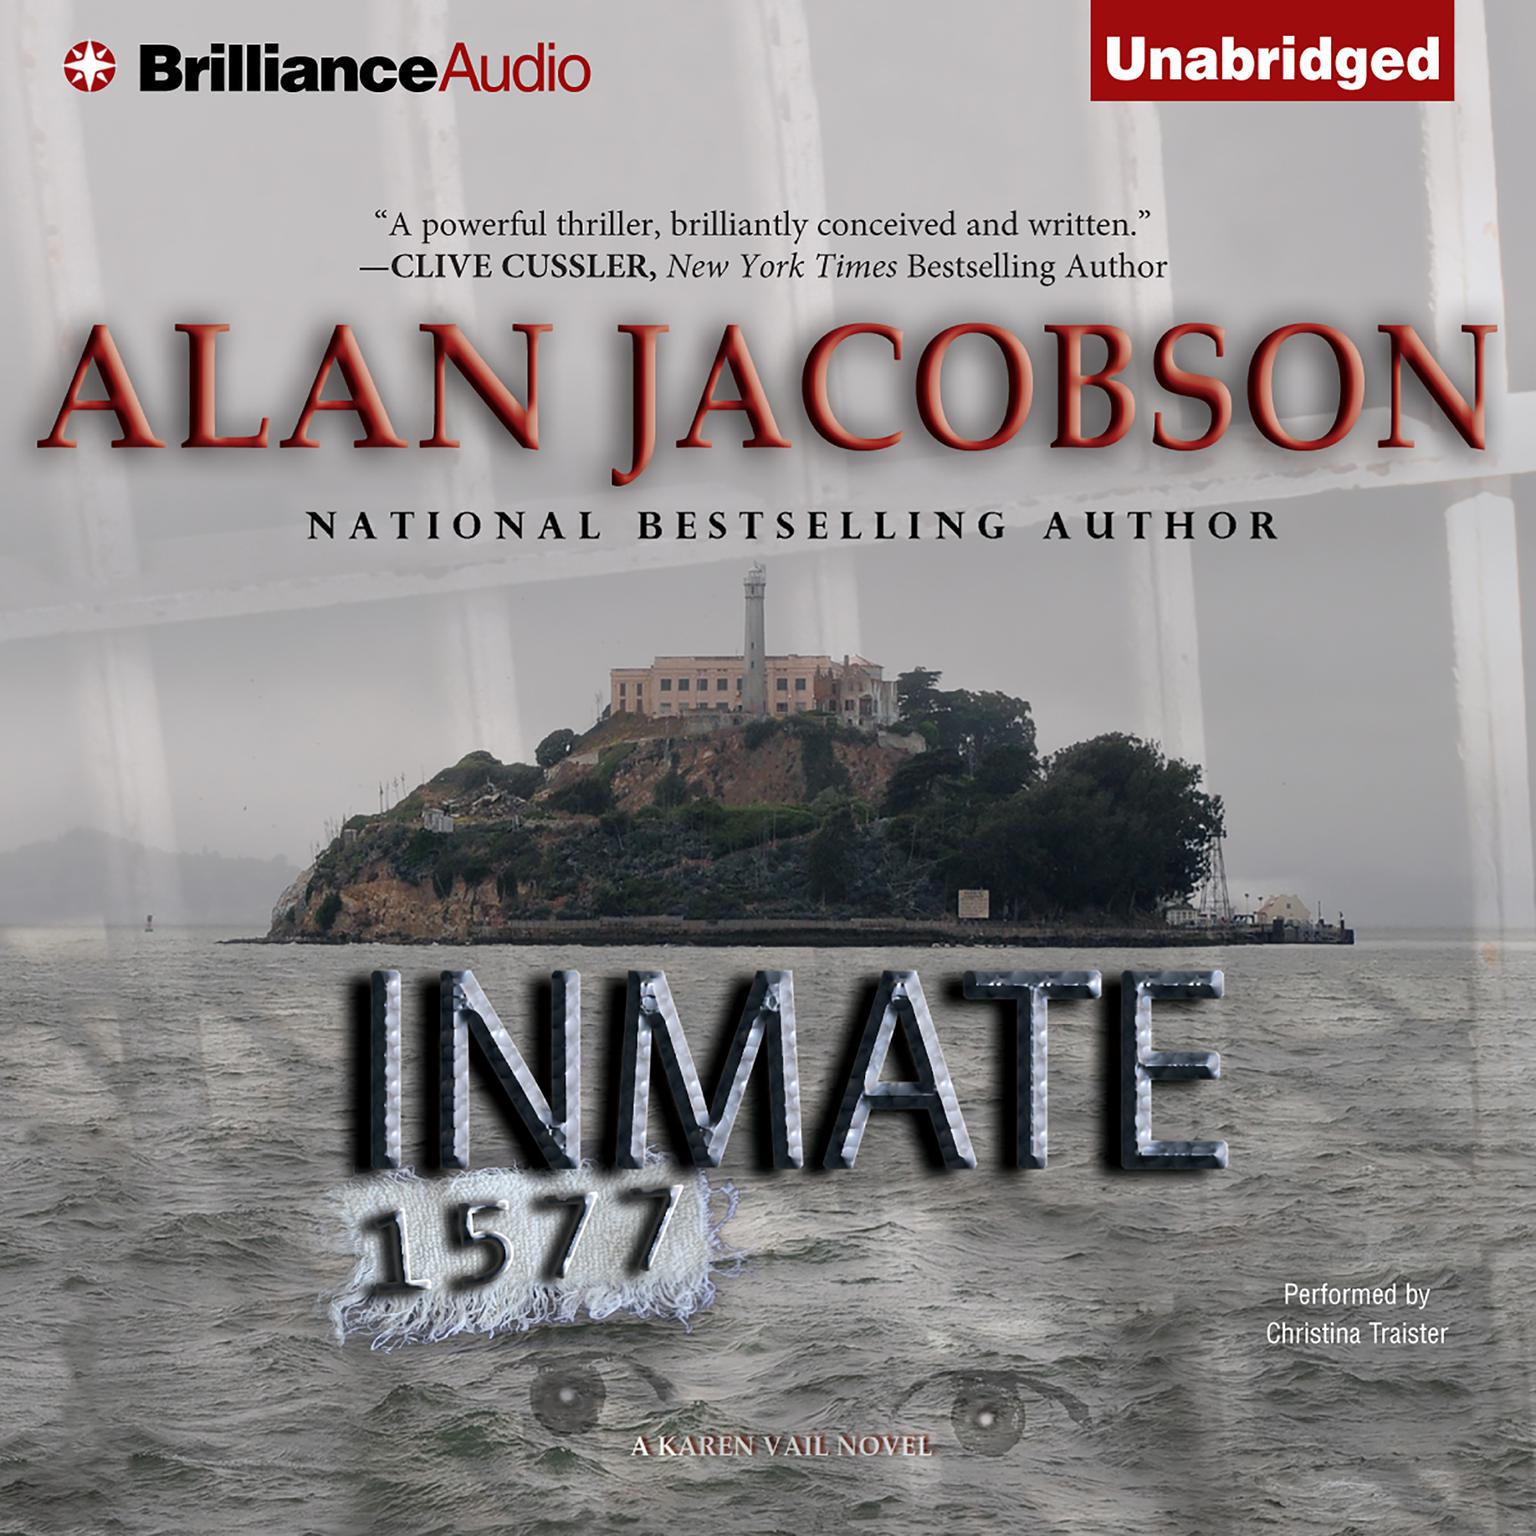 Inmate 1577 Audiobook, by Alan Jacobson